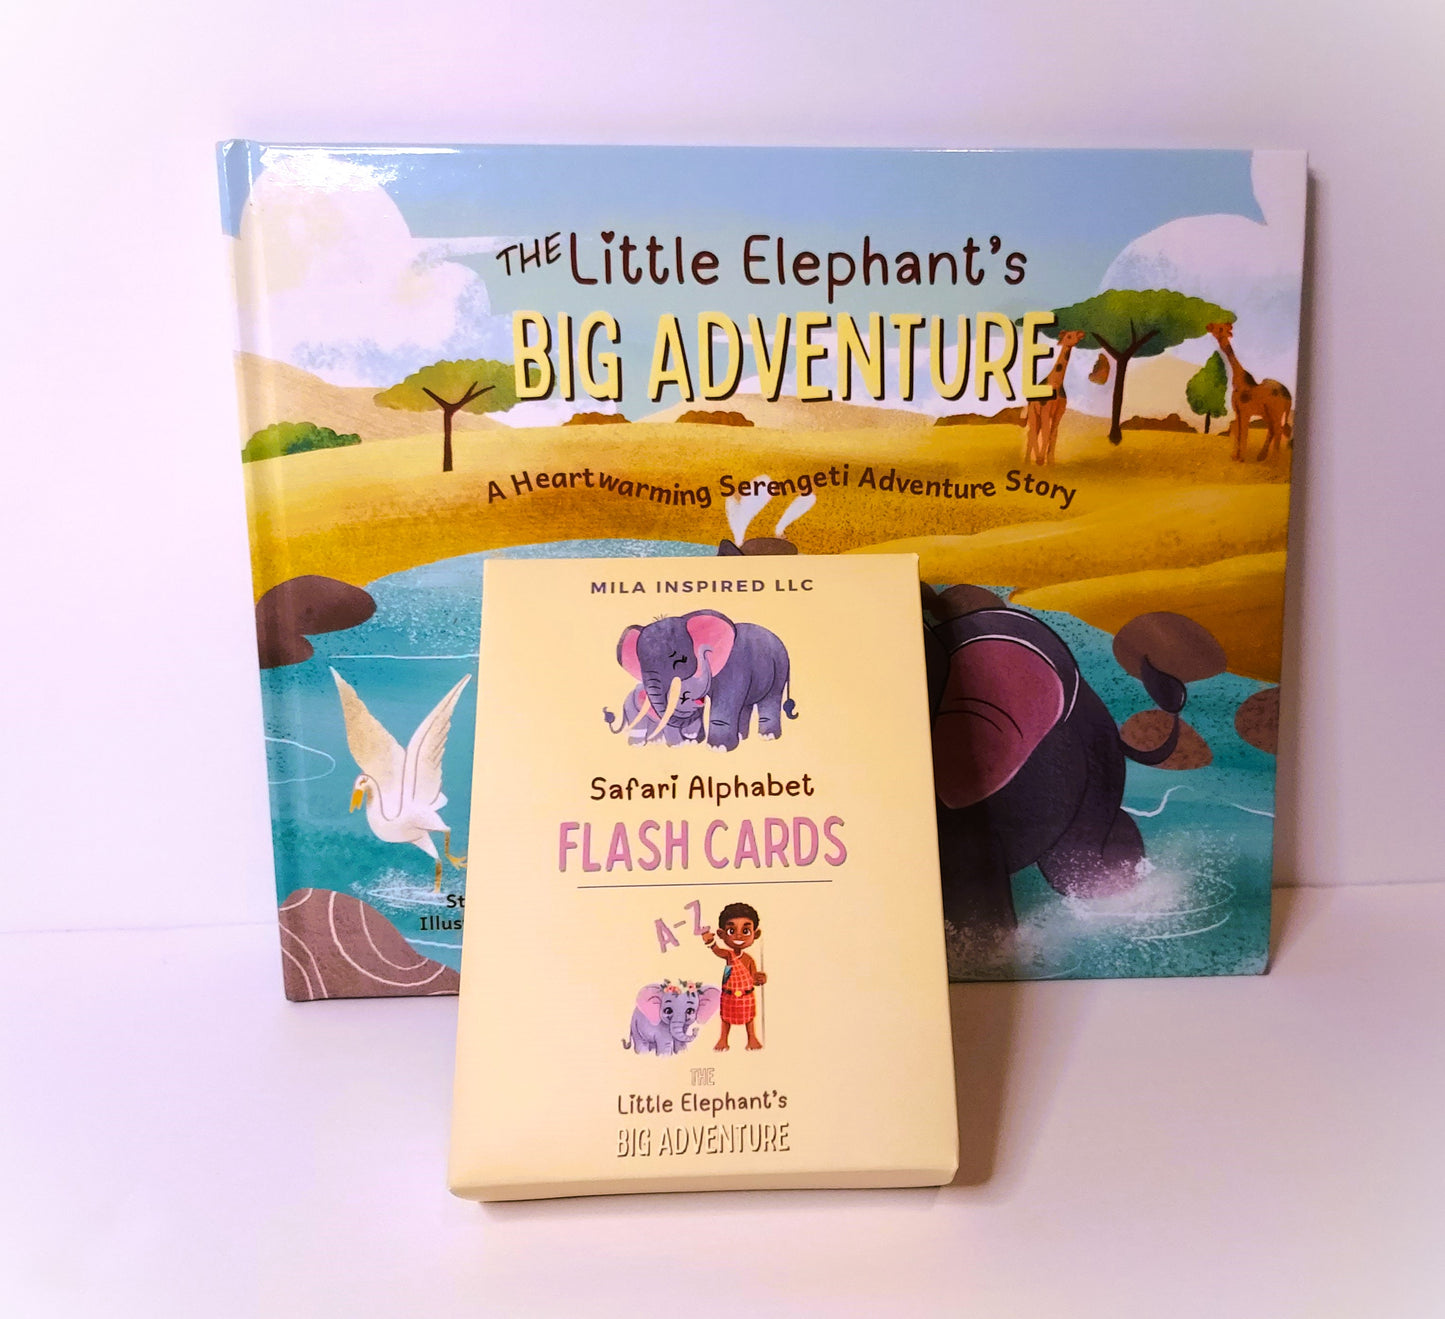 Fun Safari Alphabet Flash Cards from The Little Elephant's Big Adventure Book | Amara Baby Elephant ABC Cards | Fun Children's A to Z Learning Cards